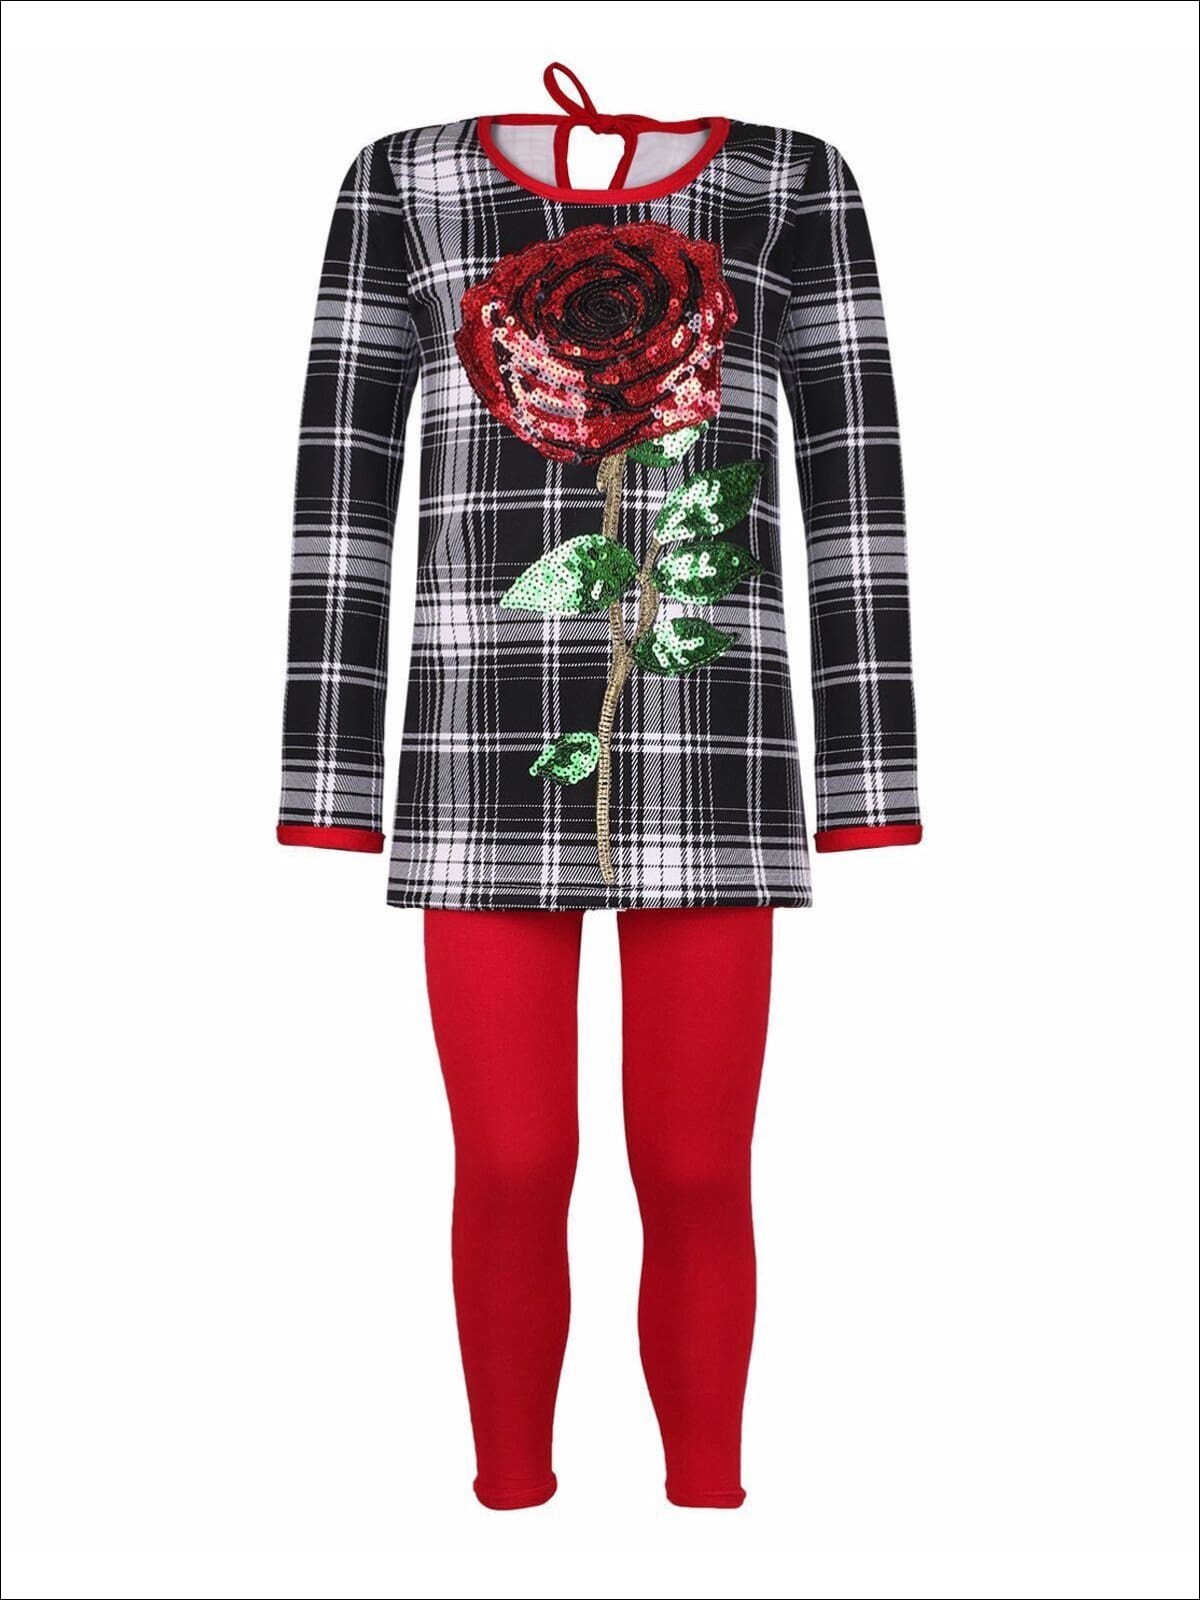 Girls Plaid Tunic with Sequin Applique Rose & Leggings Set - Black/White/Red / 2T/3T - Girls Fall Casual Set